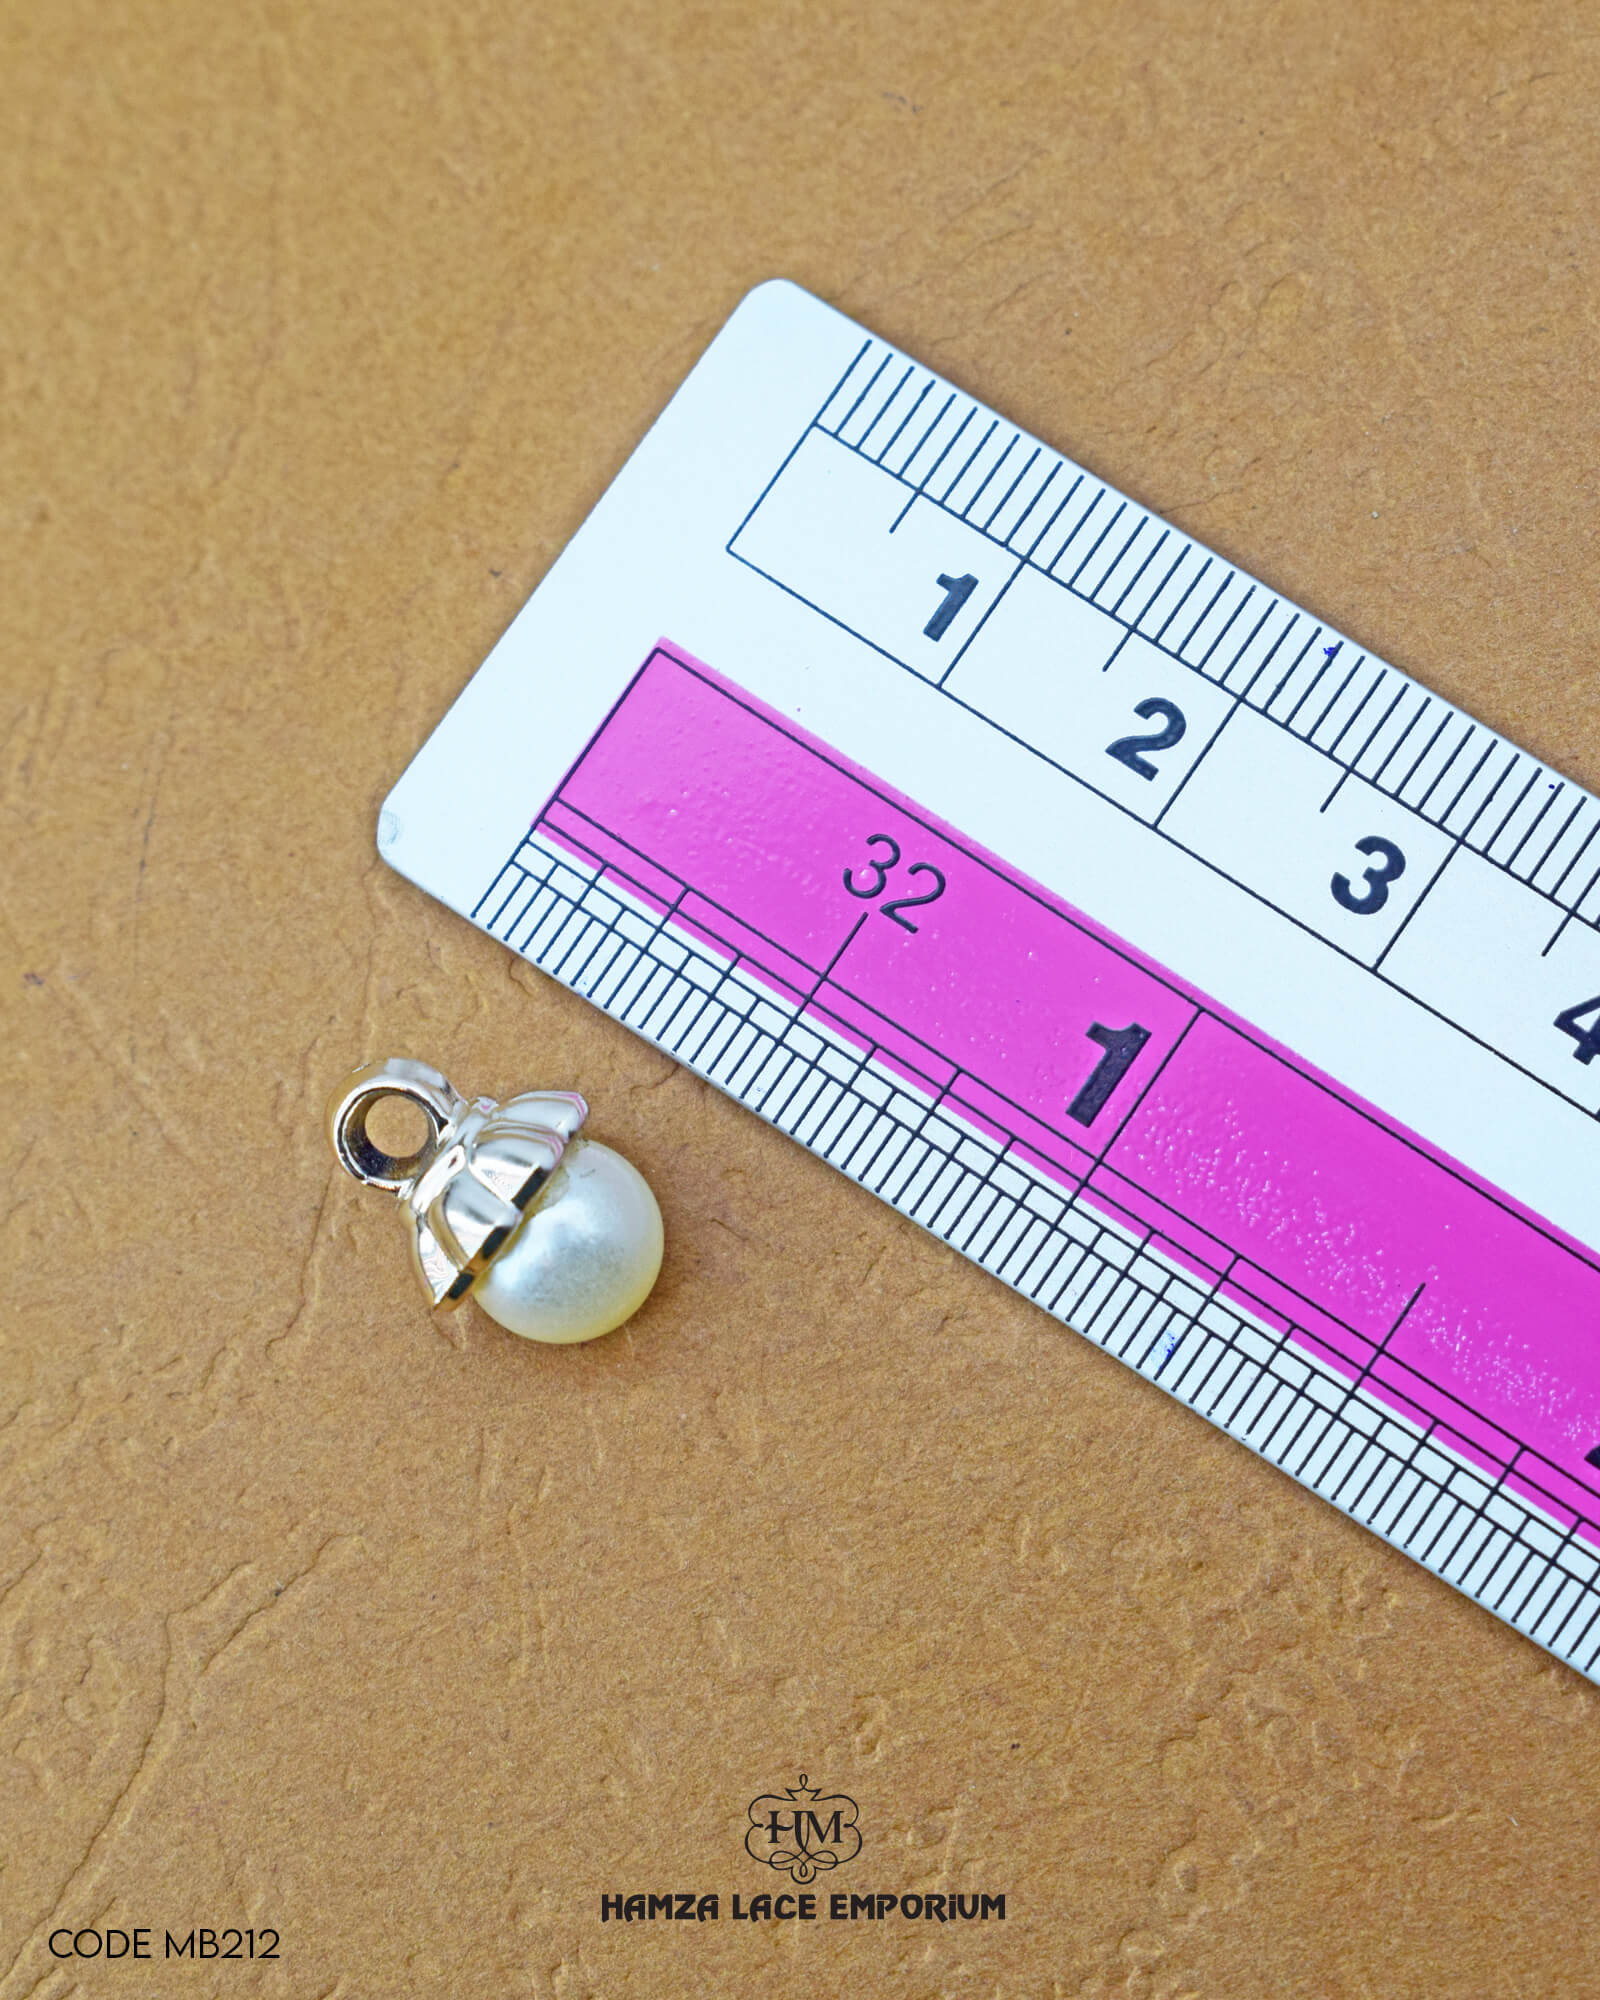 The size of the 'Pearl Plastic Button MB212' is indicated using a ruler.